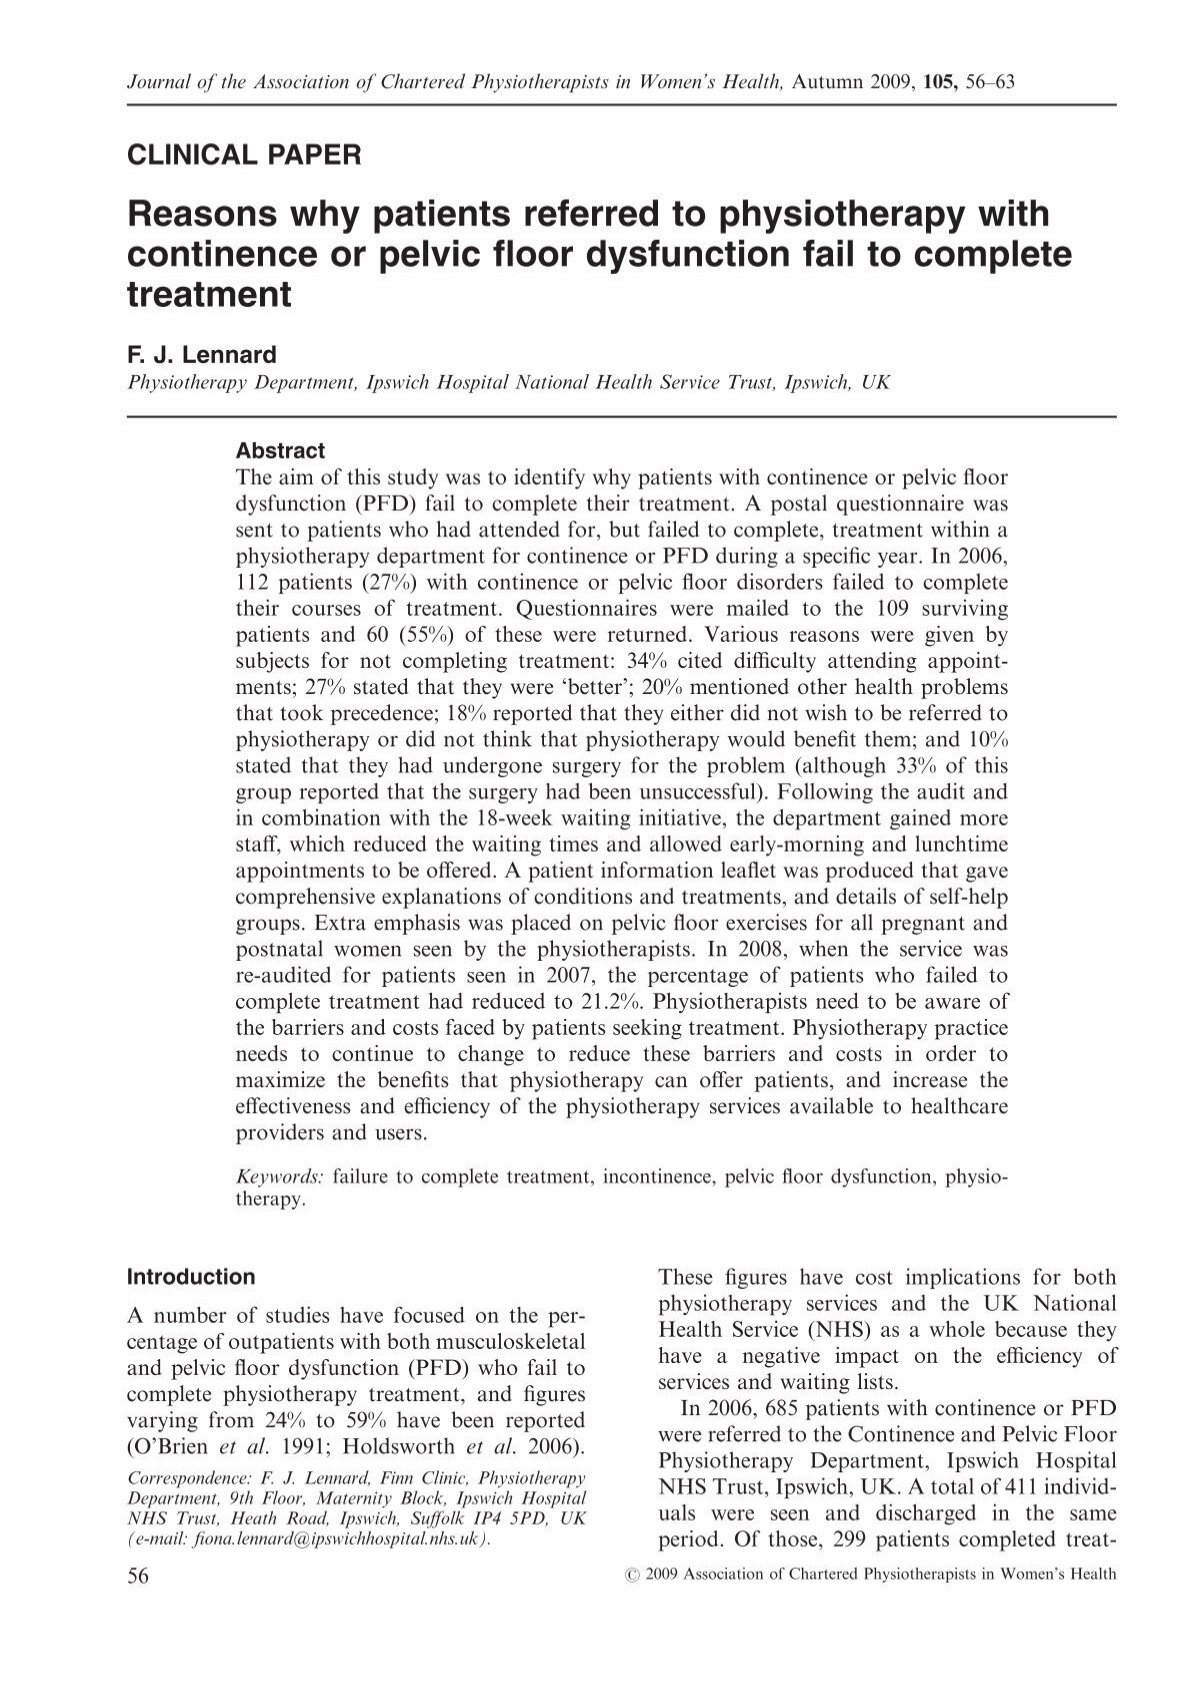 Reasons Why Patients Referred To Physiotherapy With Continence Or